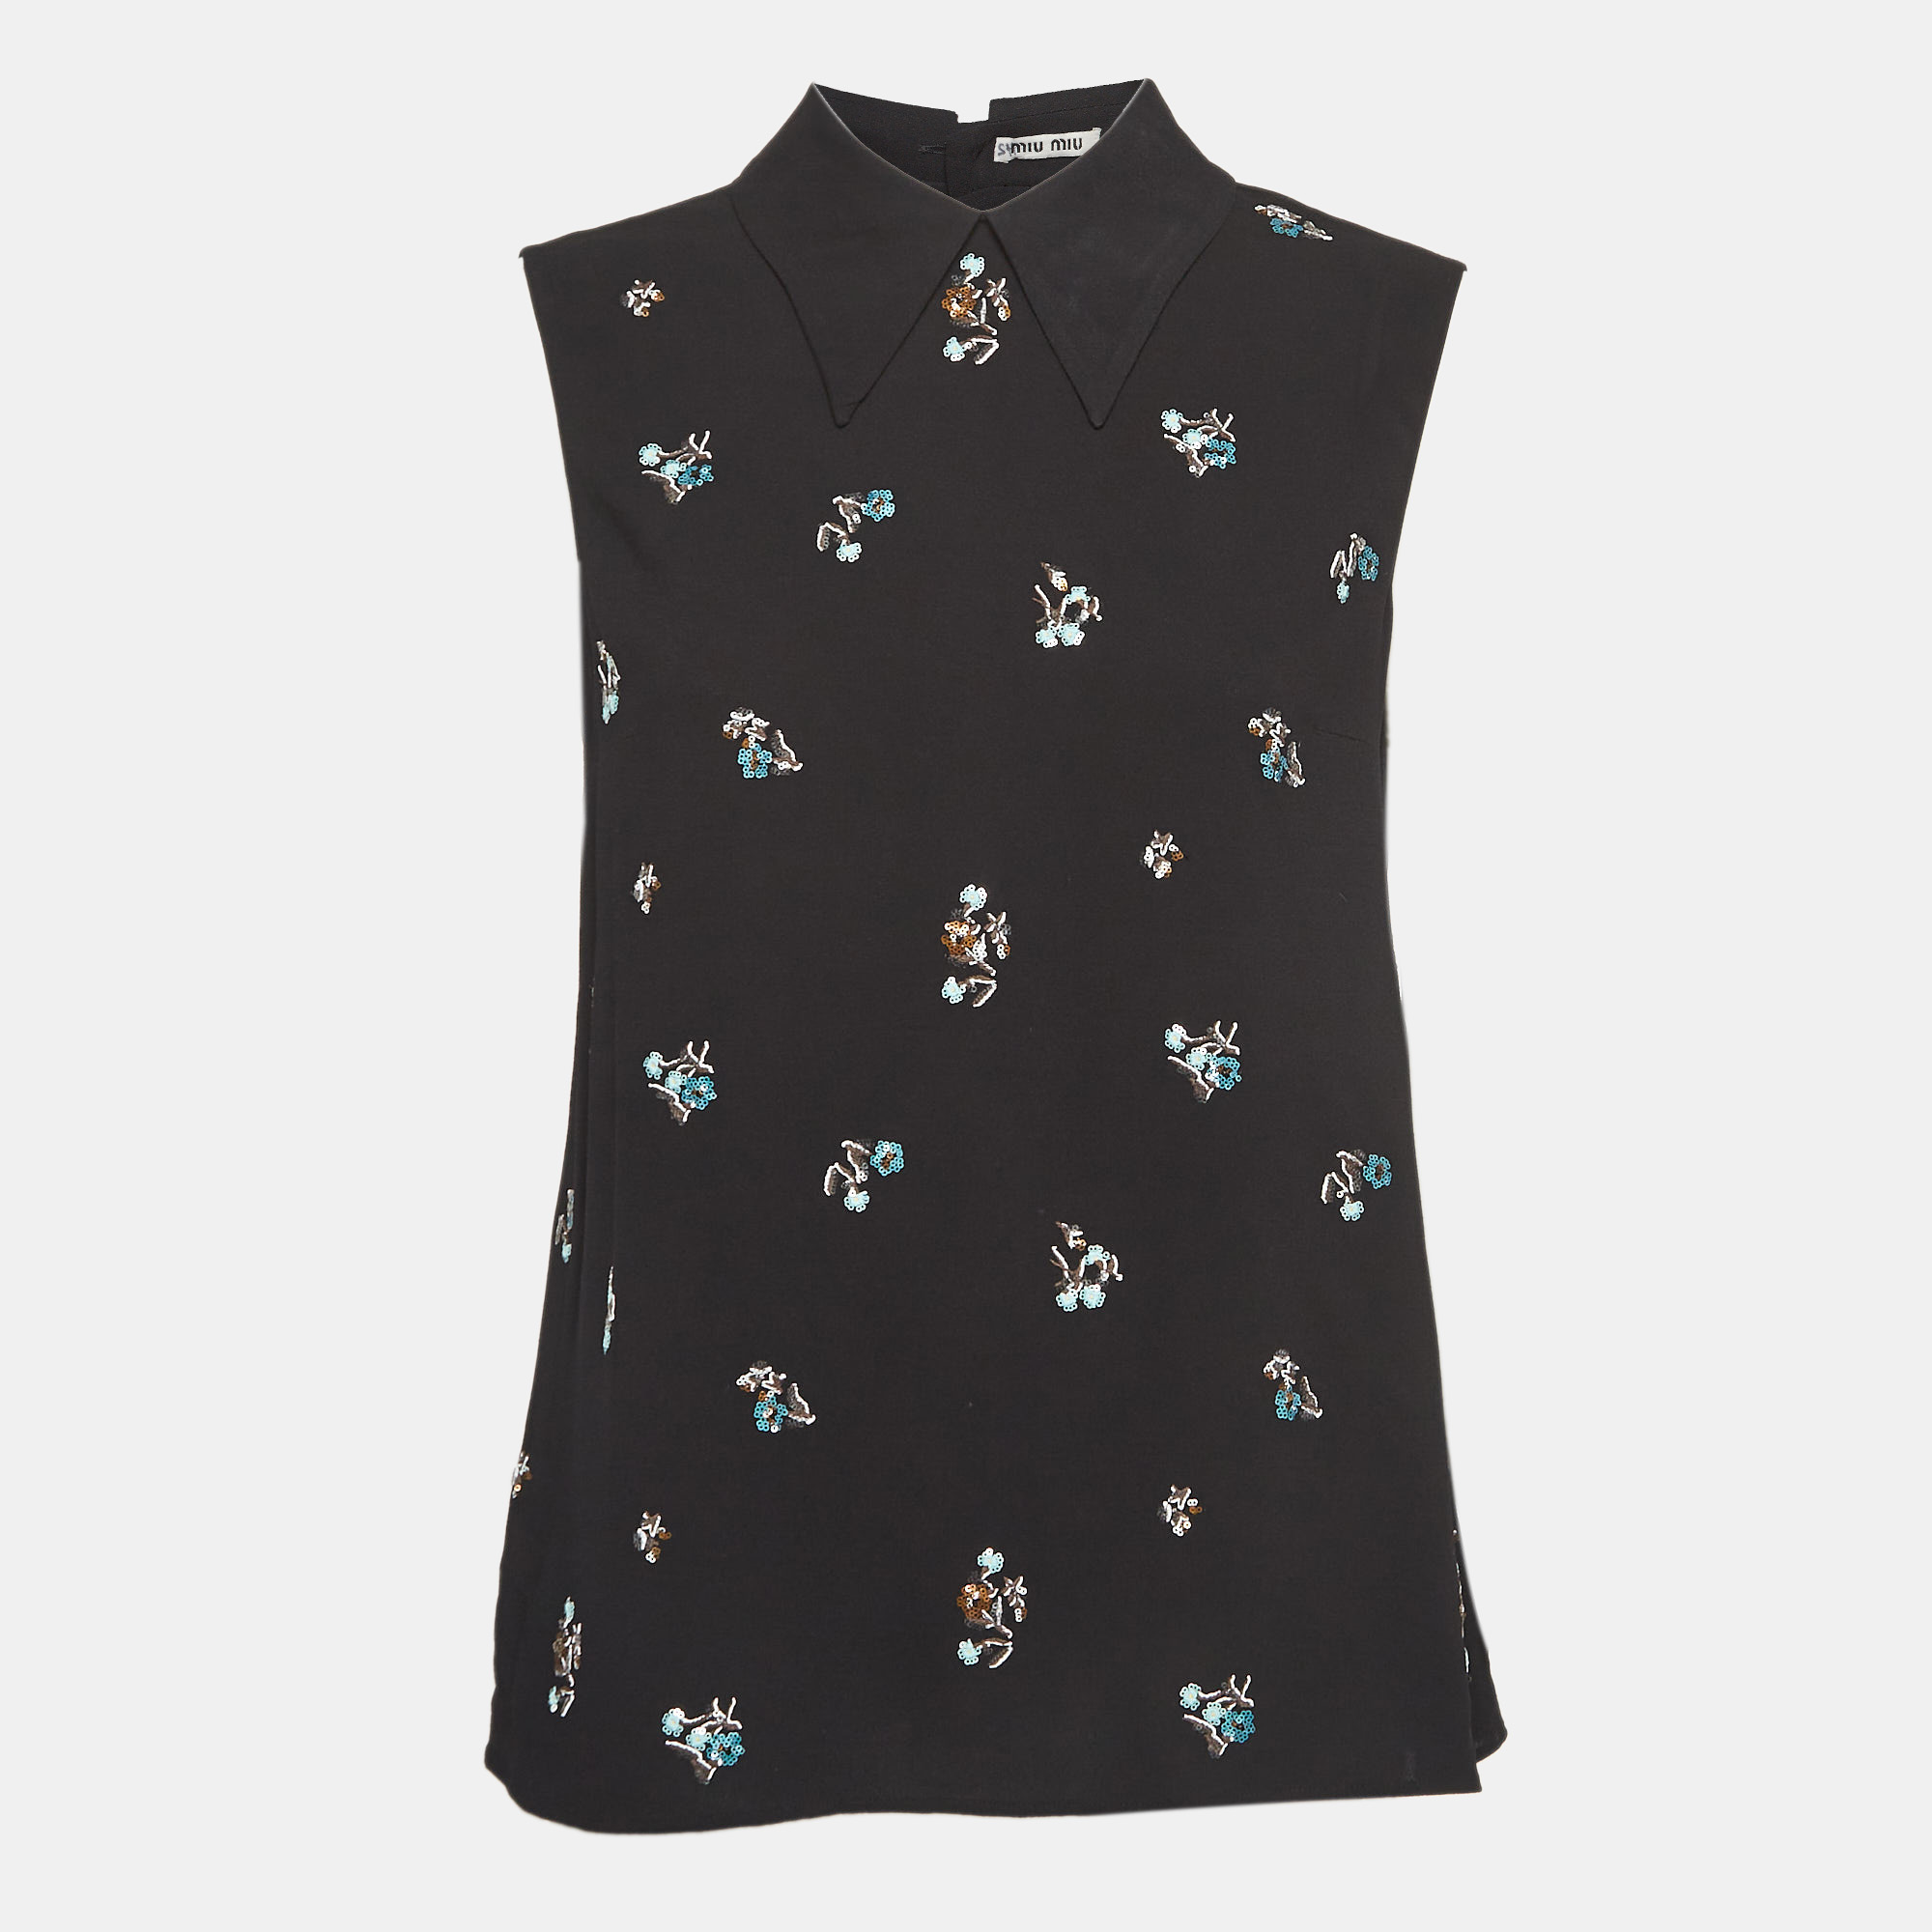 Miu miu black floral embroidered crepe back buttoned top m